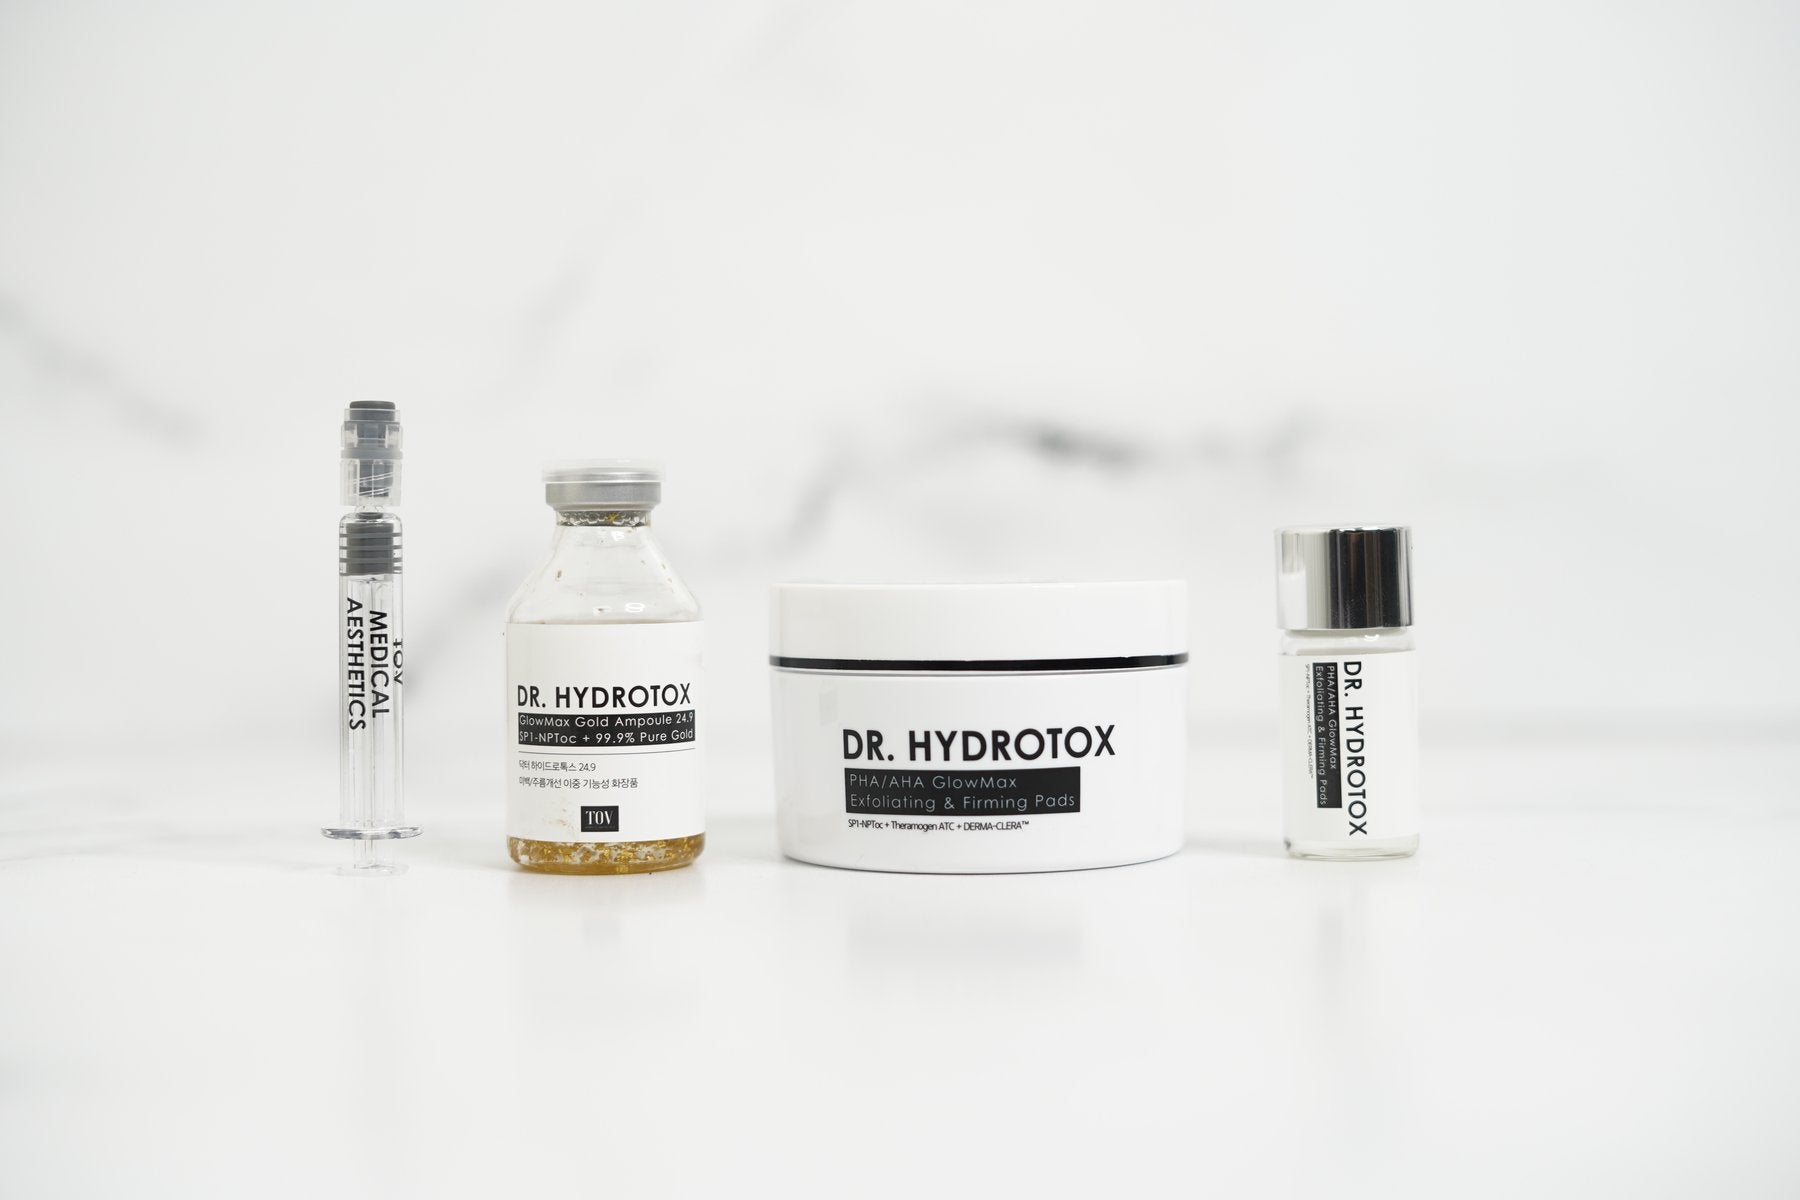 Hydrotox Glowmax Daily Skin Renewal System with Caviplla O2, Promoter Repair Cell and Free NeoGenesis Eye Serum